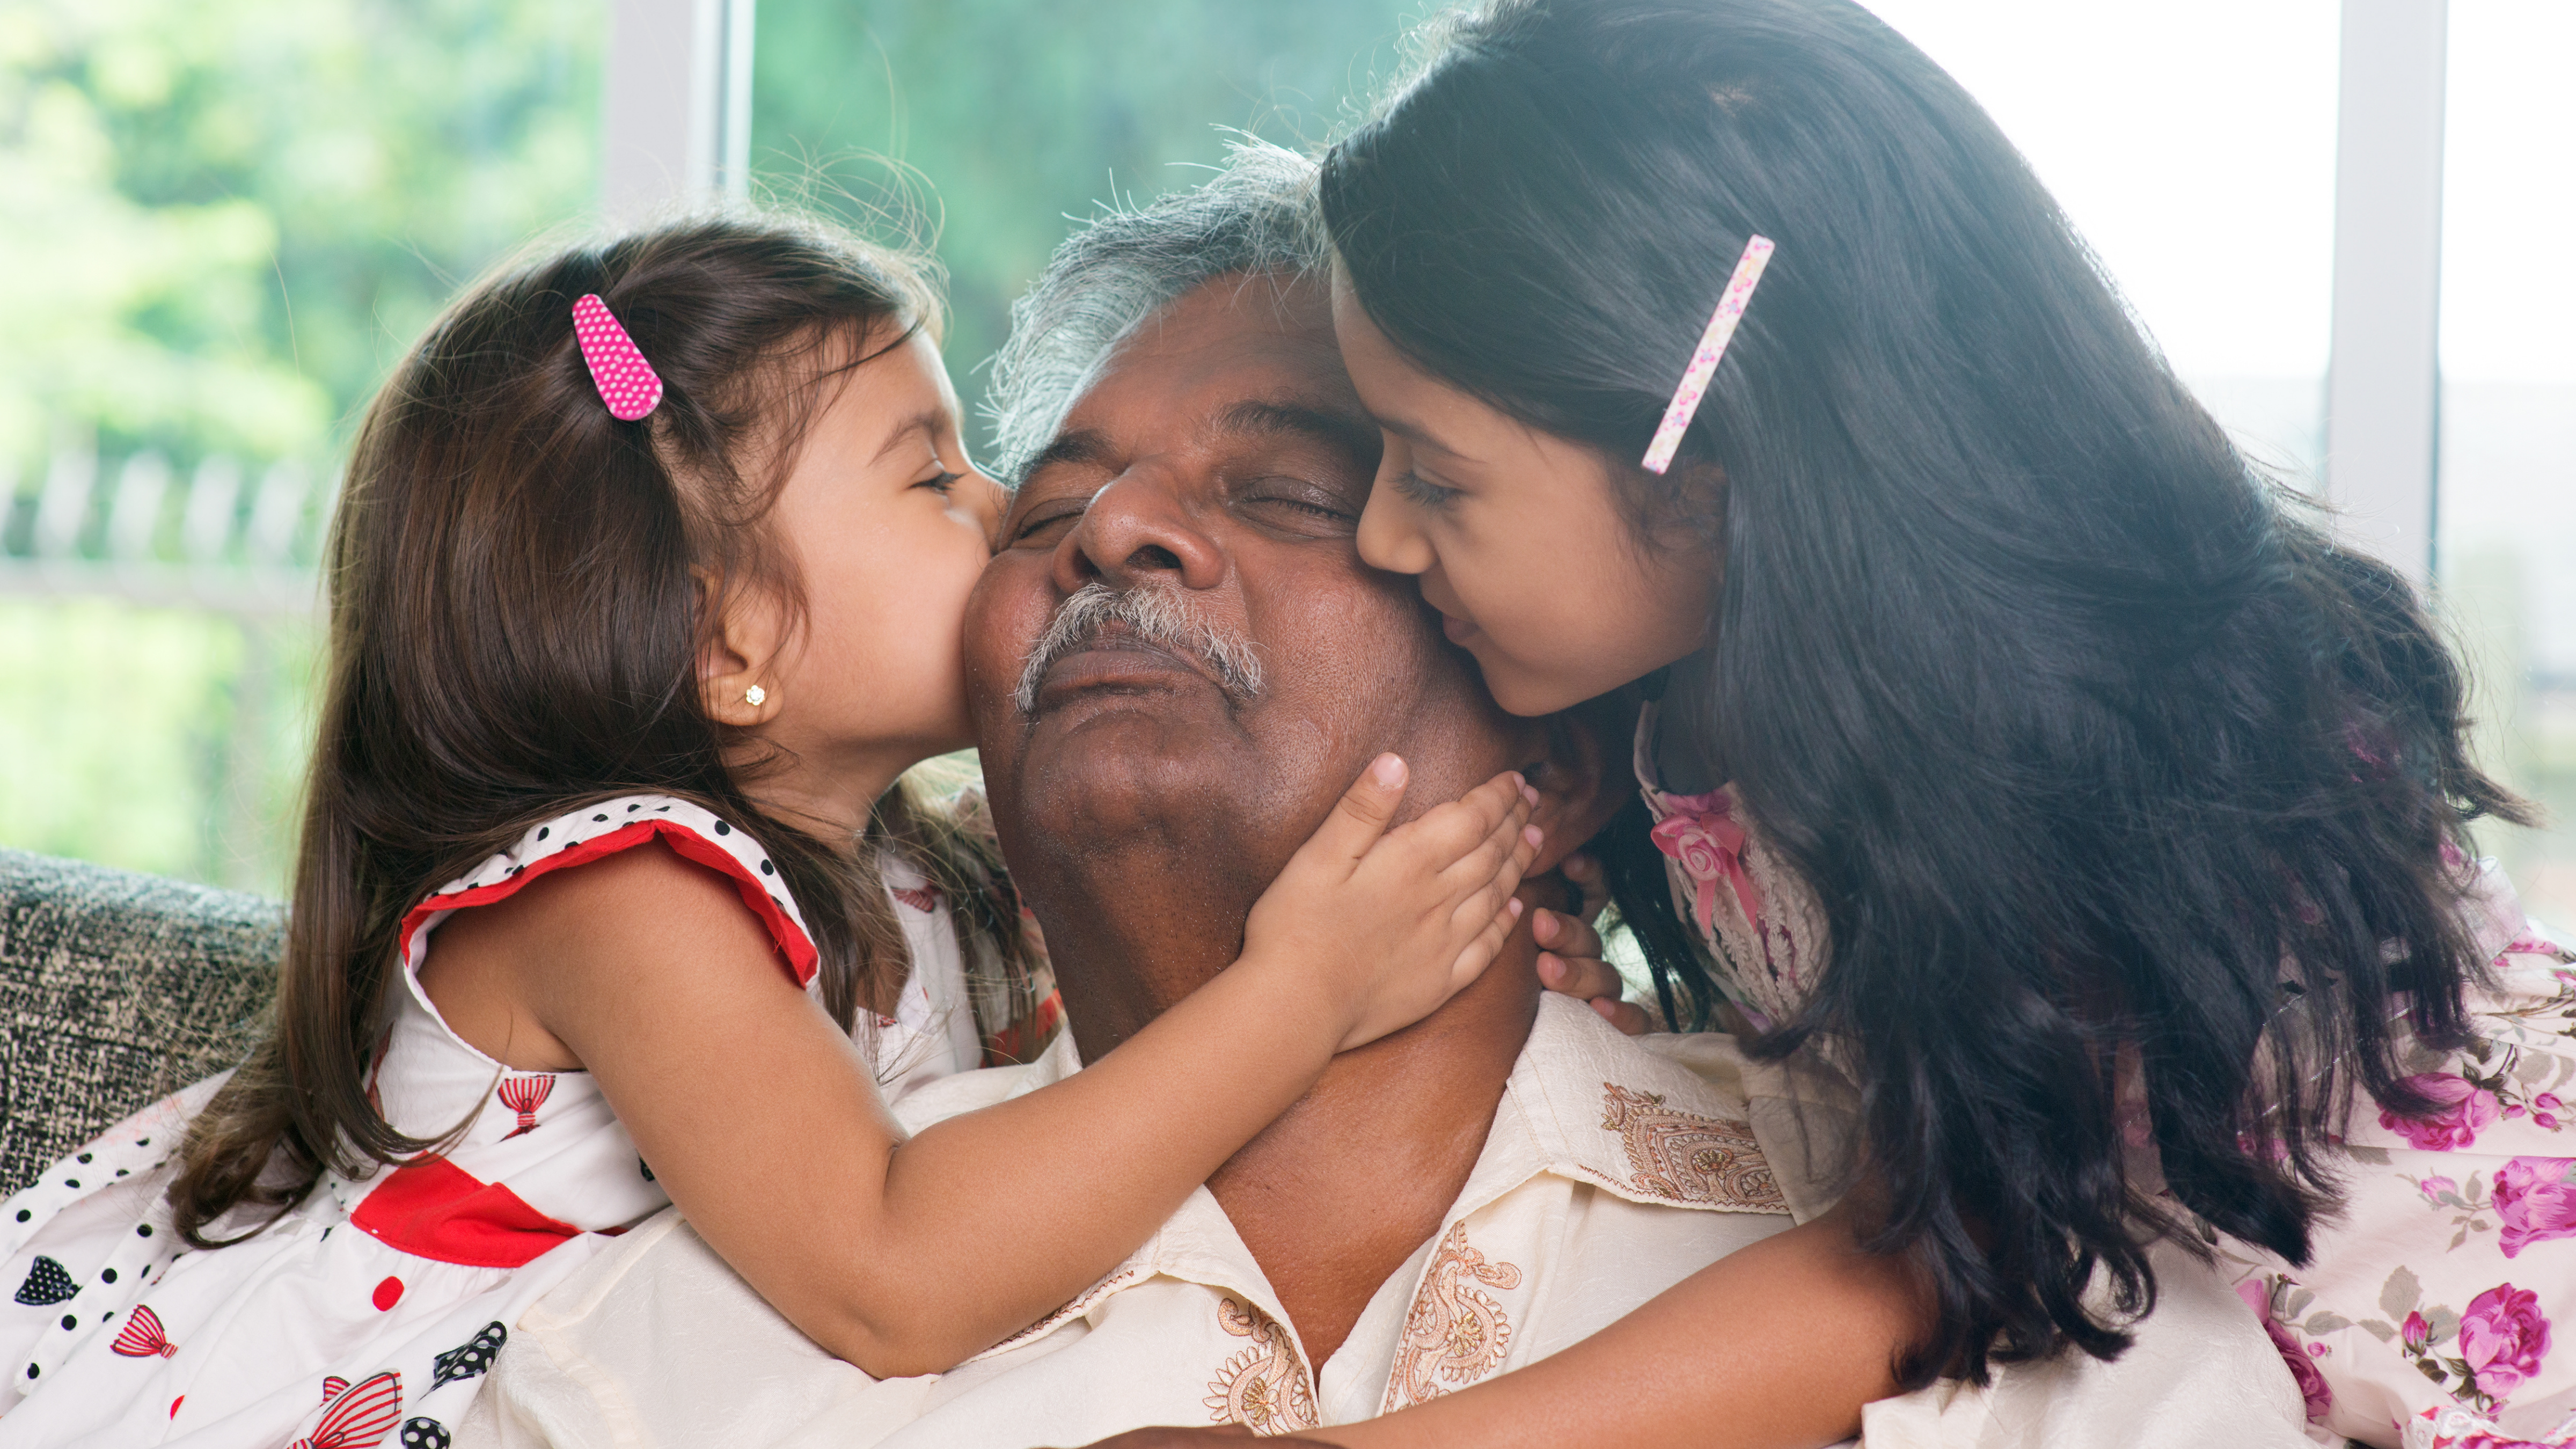 Two young girls cuddle and kiss their grandfather who looks delighted by their affection.